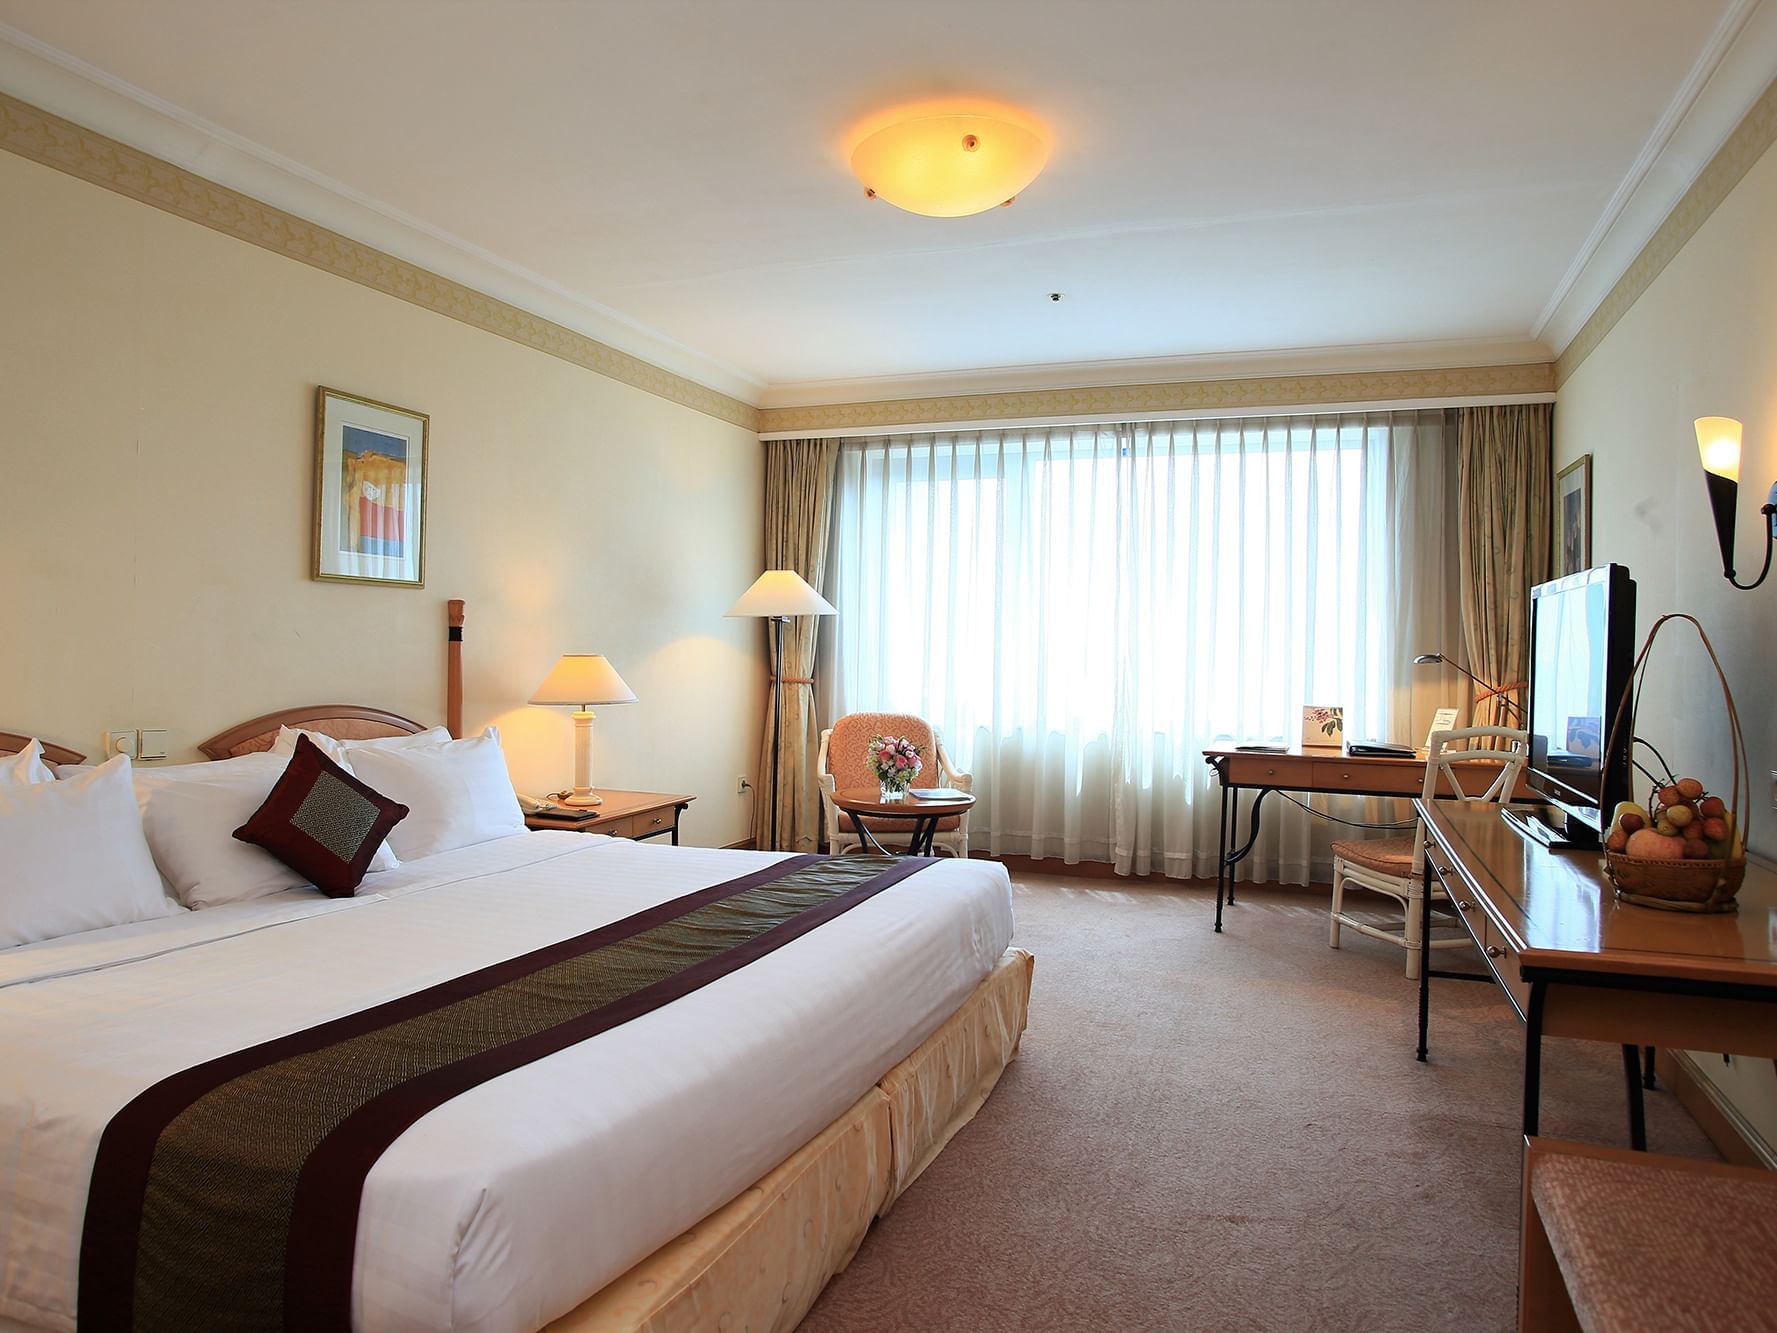 Deluxe Room with one bed at Hanoi Daewoo Hotel